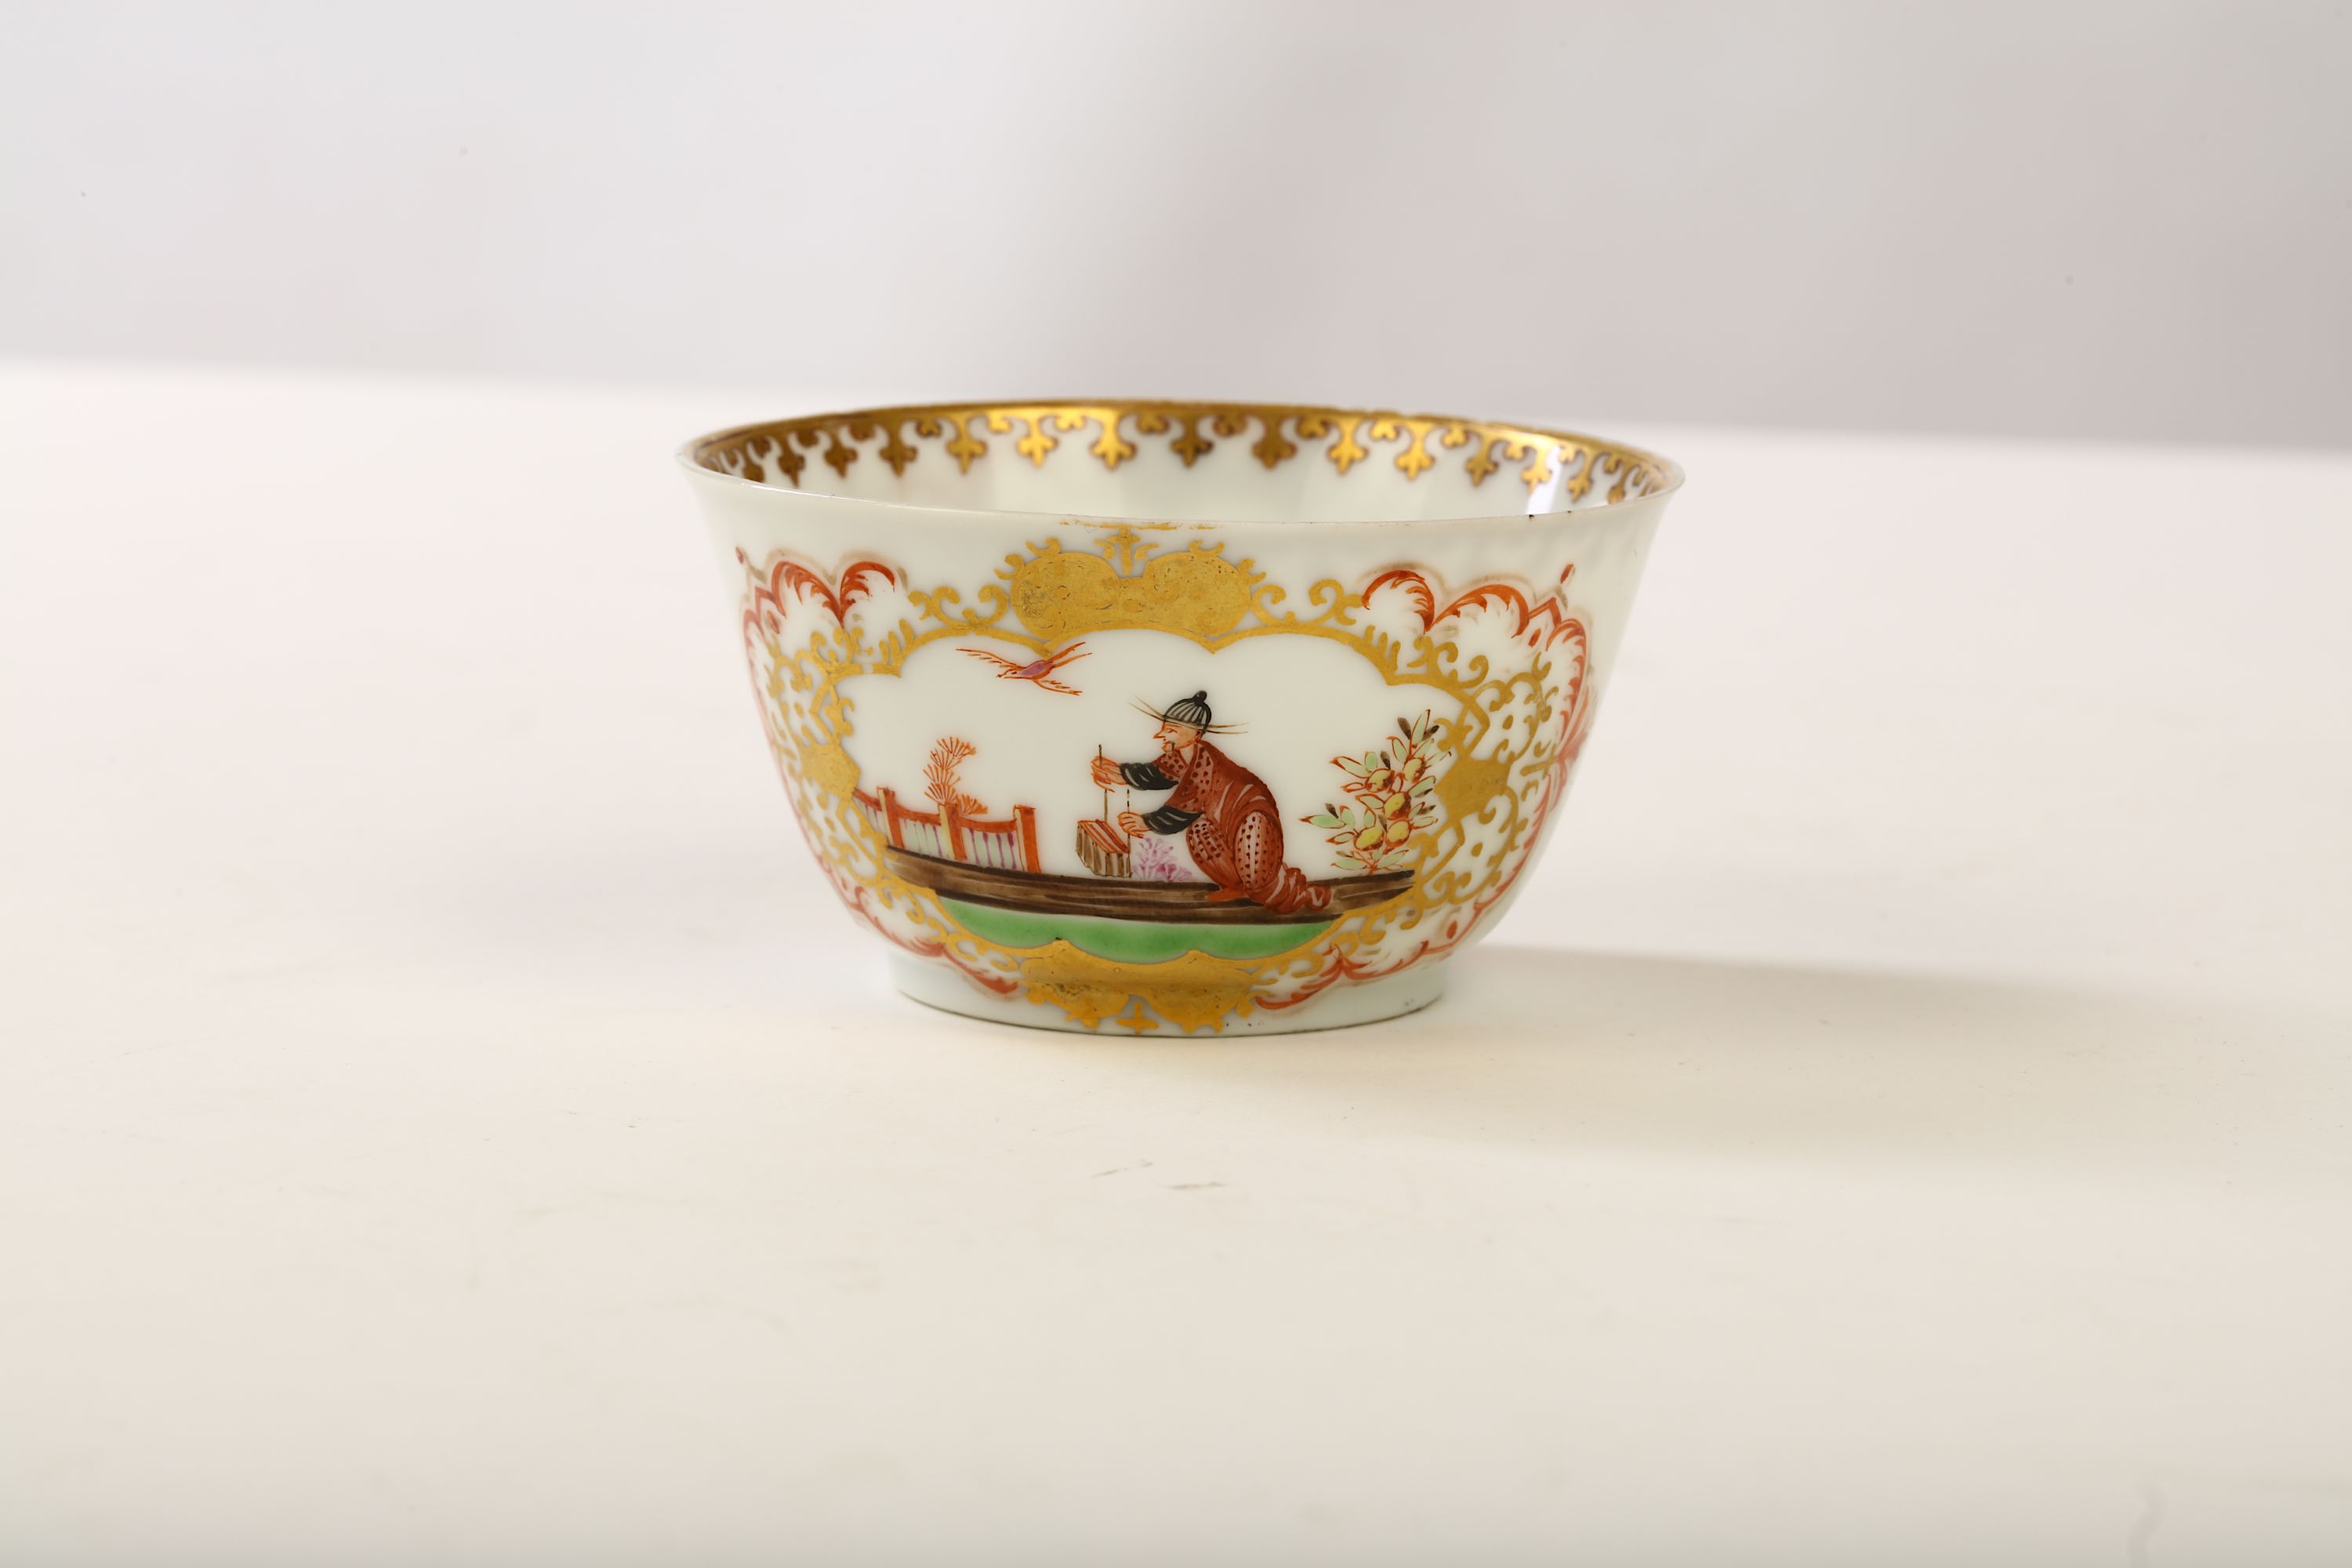 A HAUSMALER-DECORATED CHINESE EXPORT PORCELAIN TEABOWL - Image 2 of 4